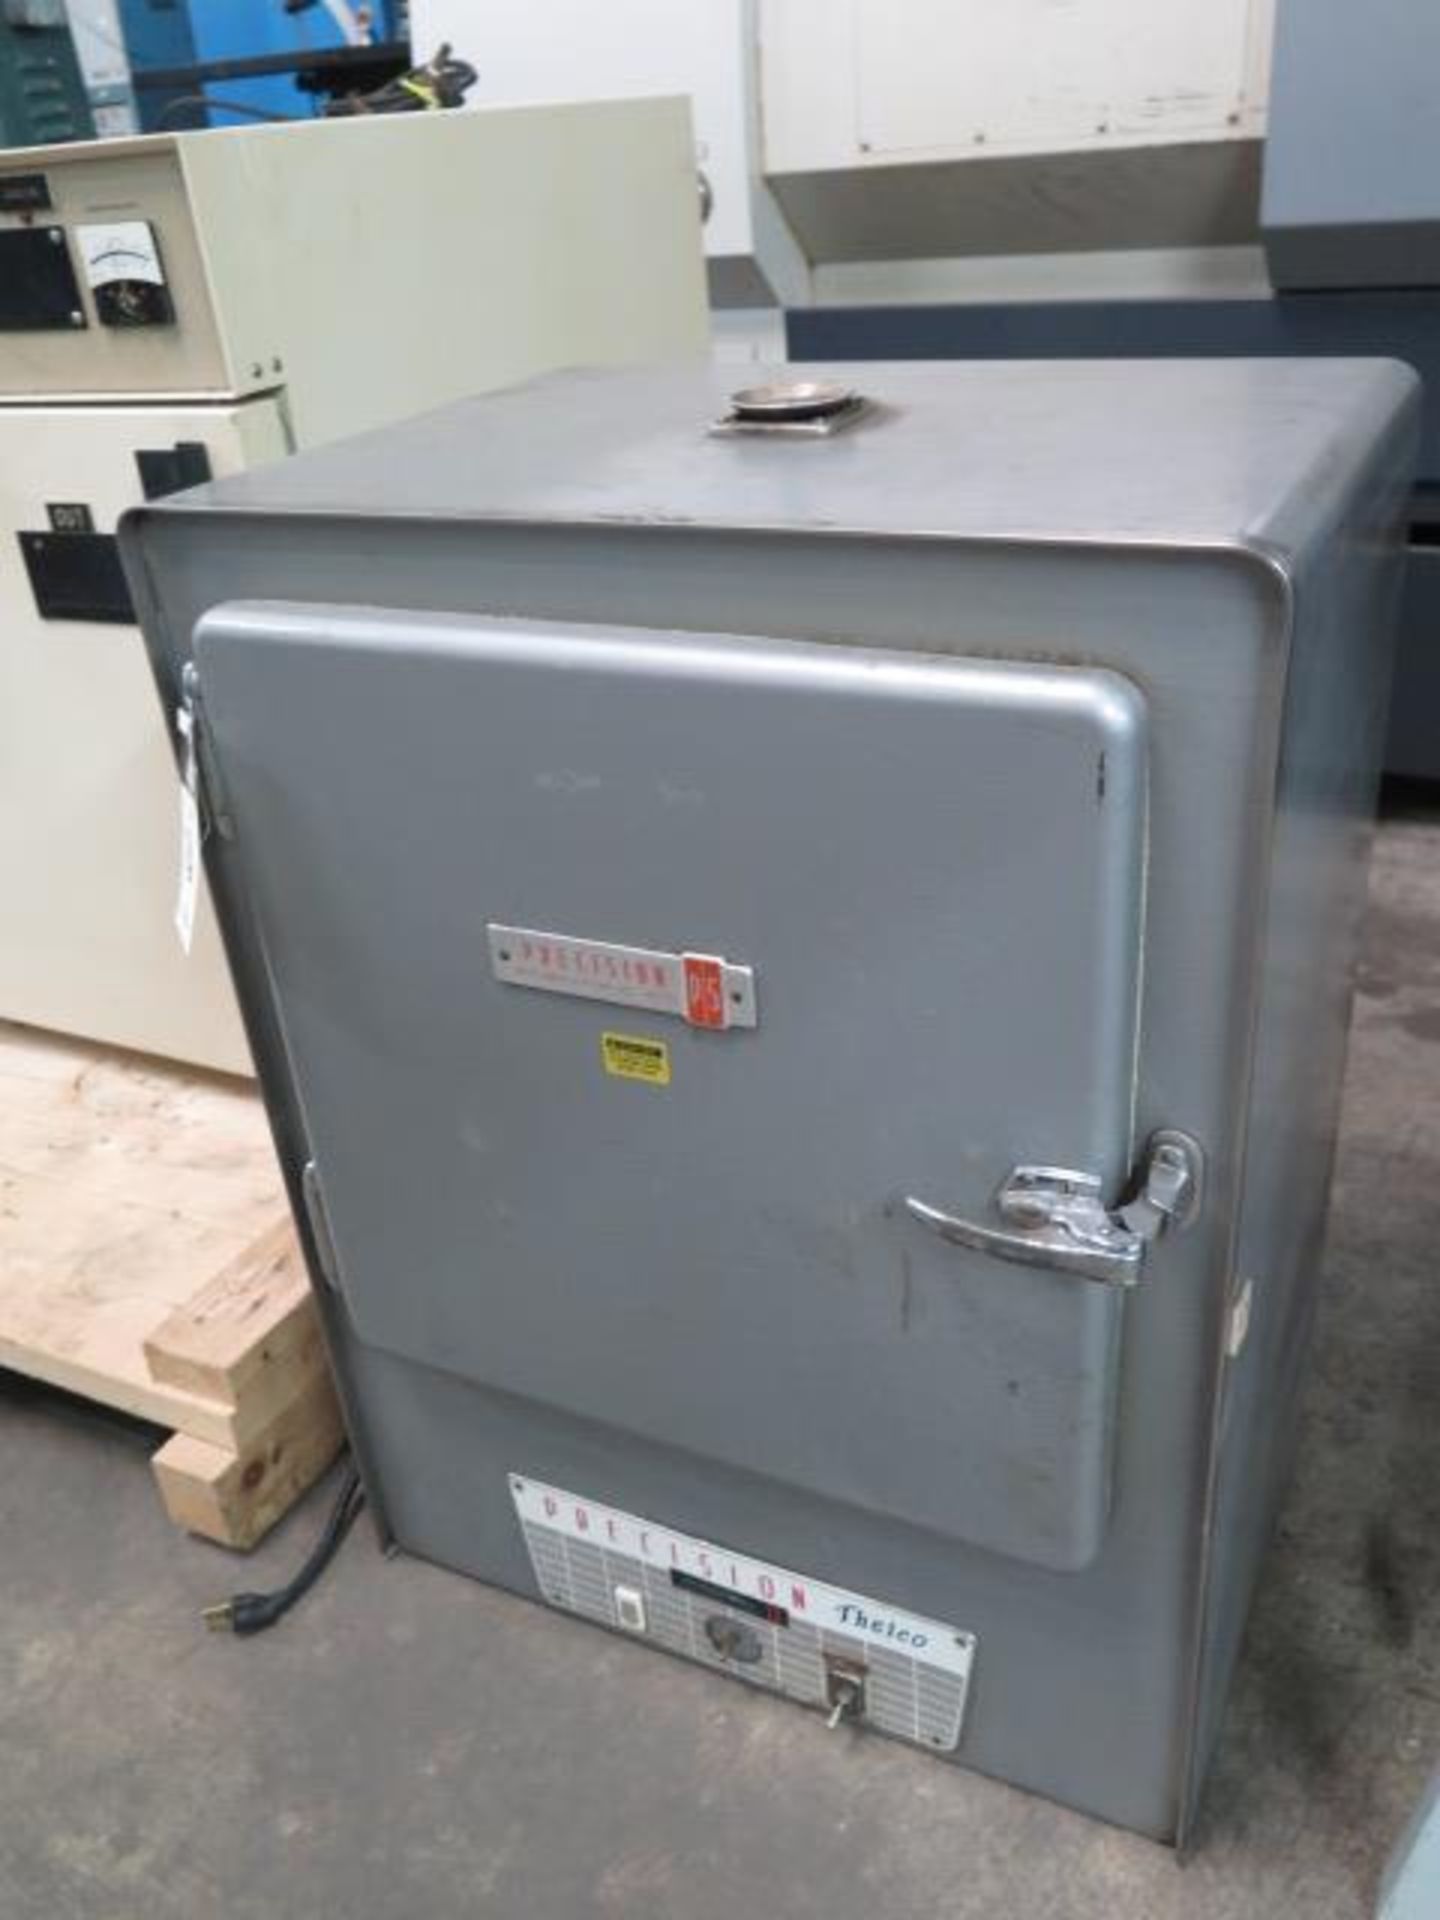 Precision “Thelco” mdl. 18 200 Deg. C Electric Lab Oven s/n 12-T-3 (SOLD AS-IS - NO WARRANTY) - Image 2 of 4